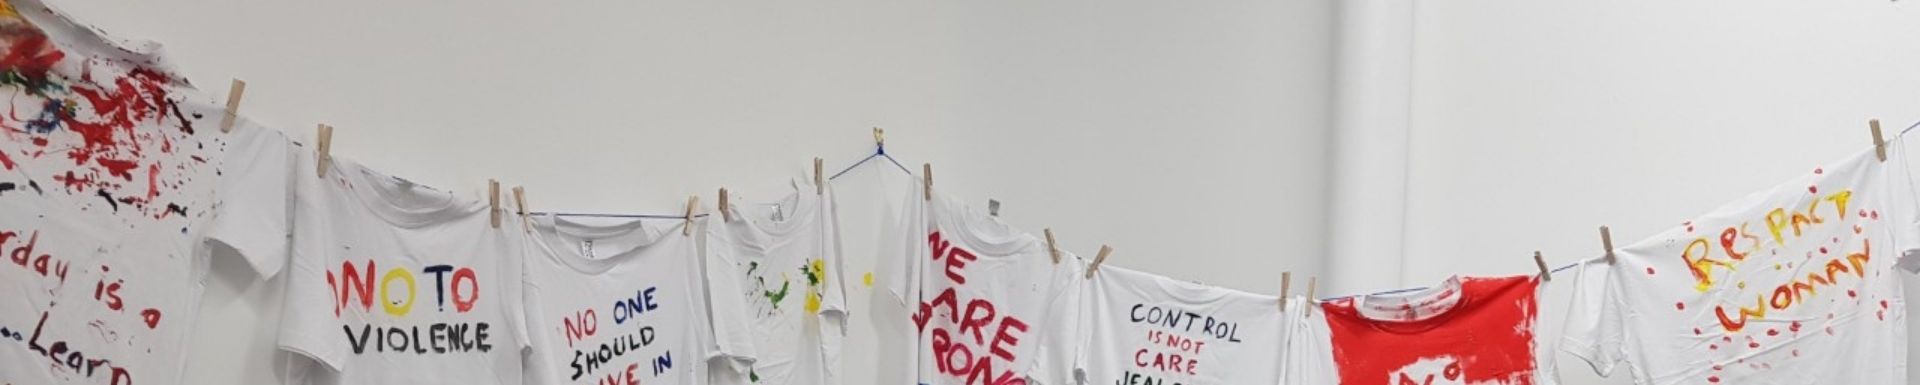 clothes line displaying tshirts with anti-violence messages